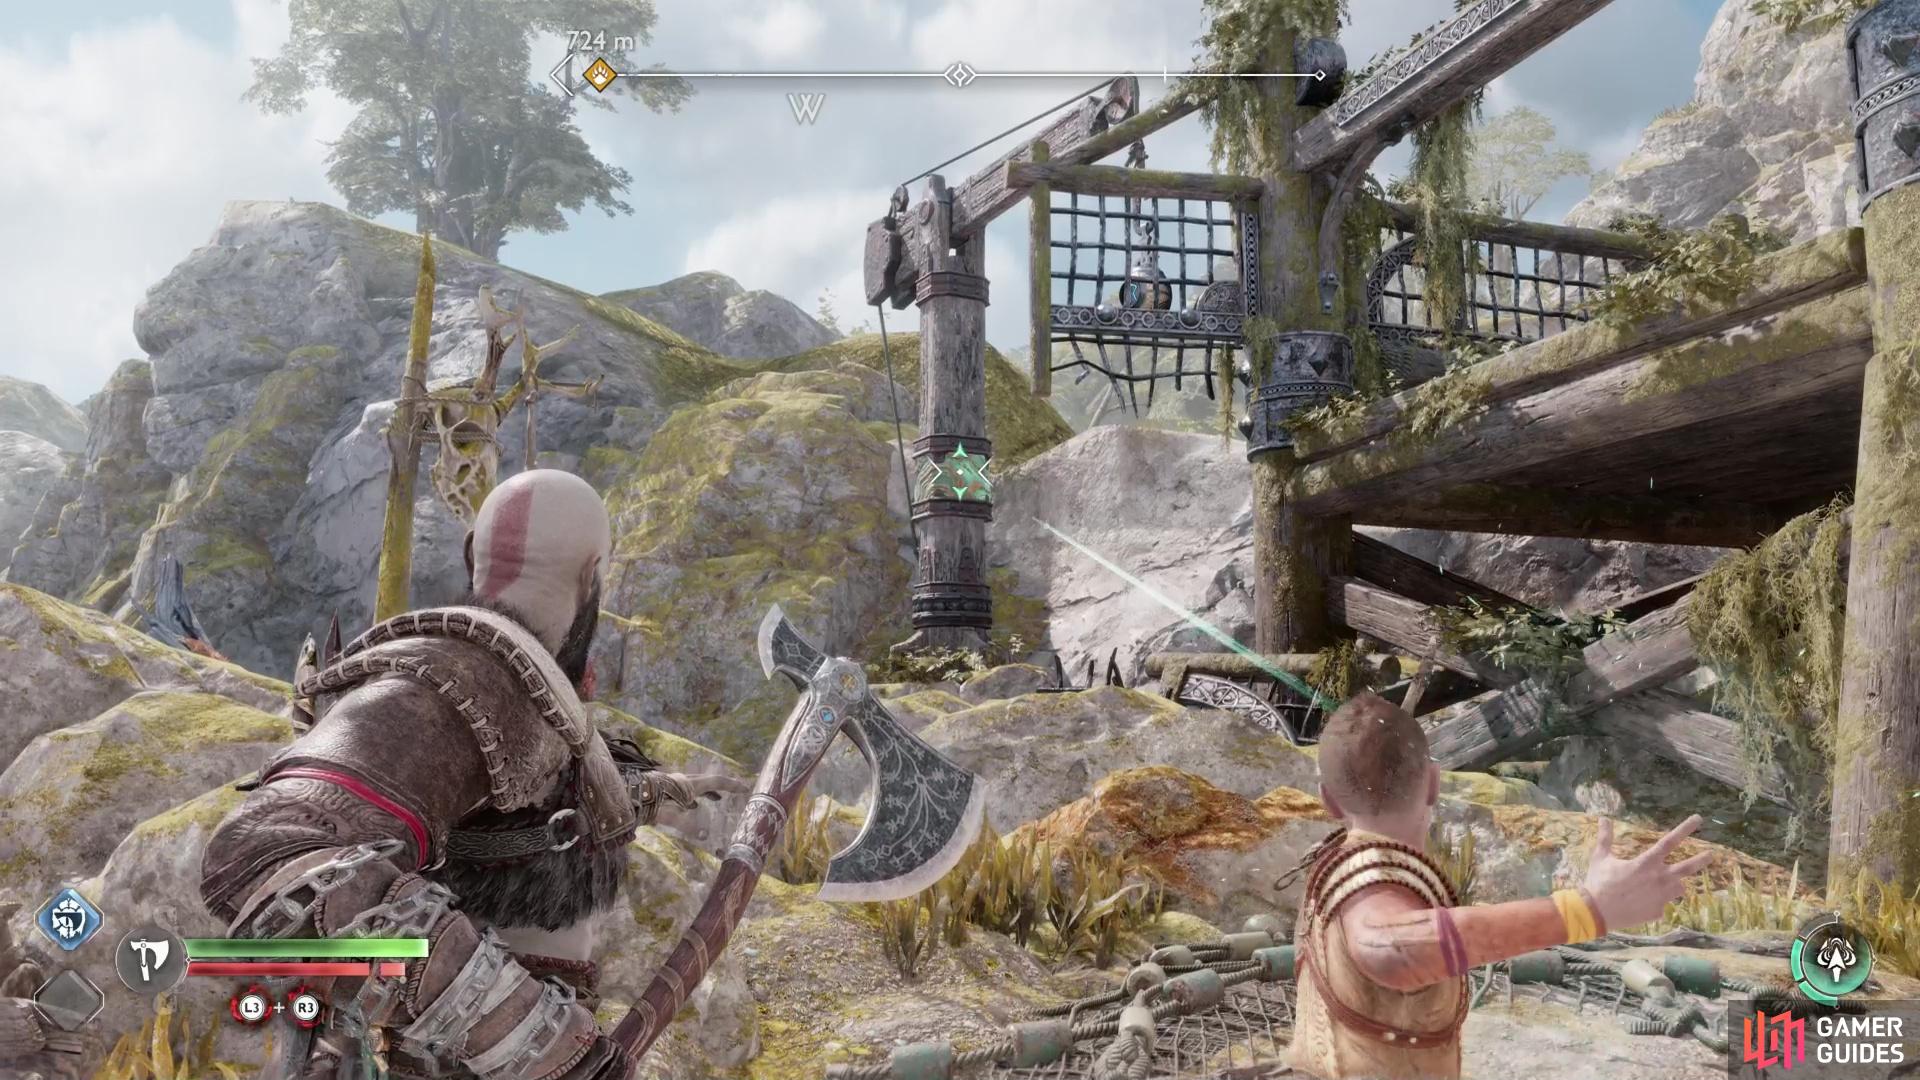 Have Atreus shoot a crane with sonic arrows, warping the device and revealing a rune gong.